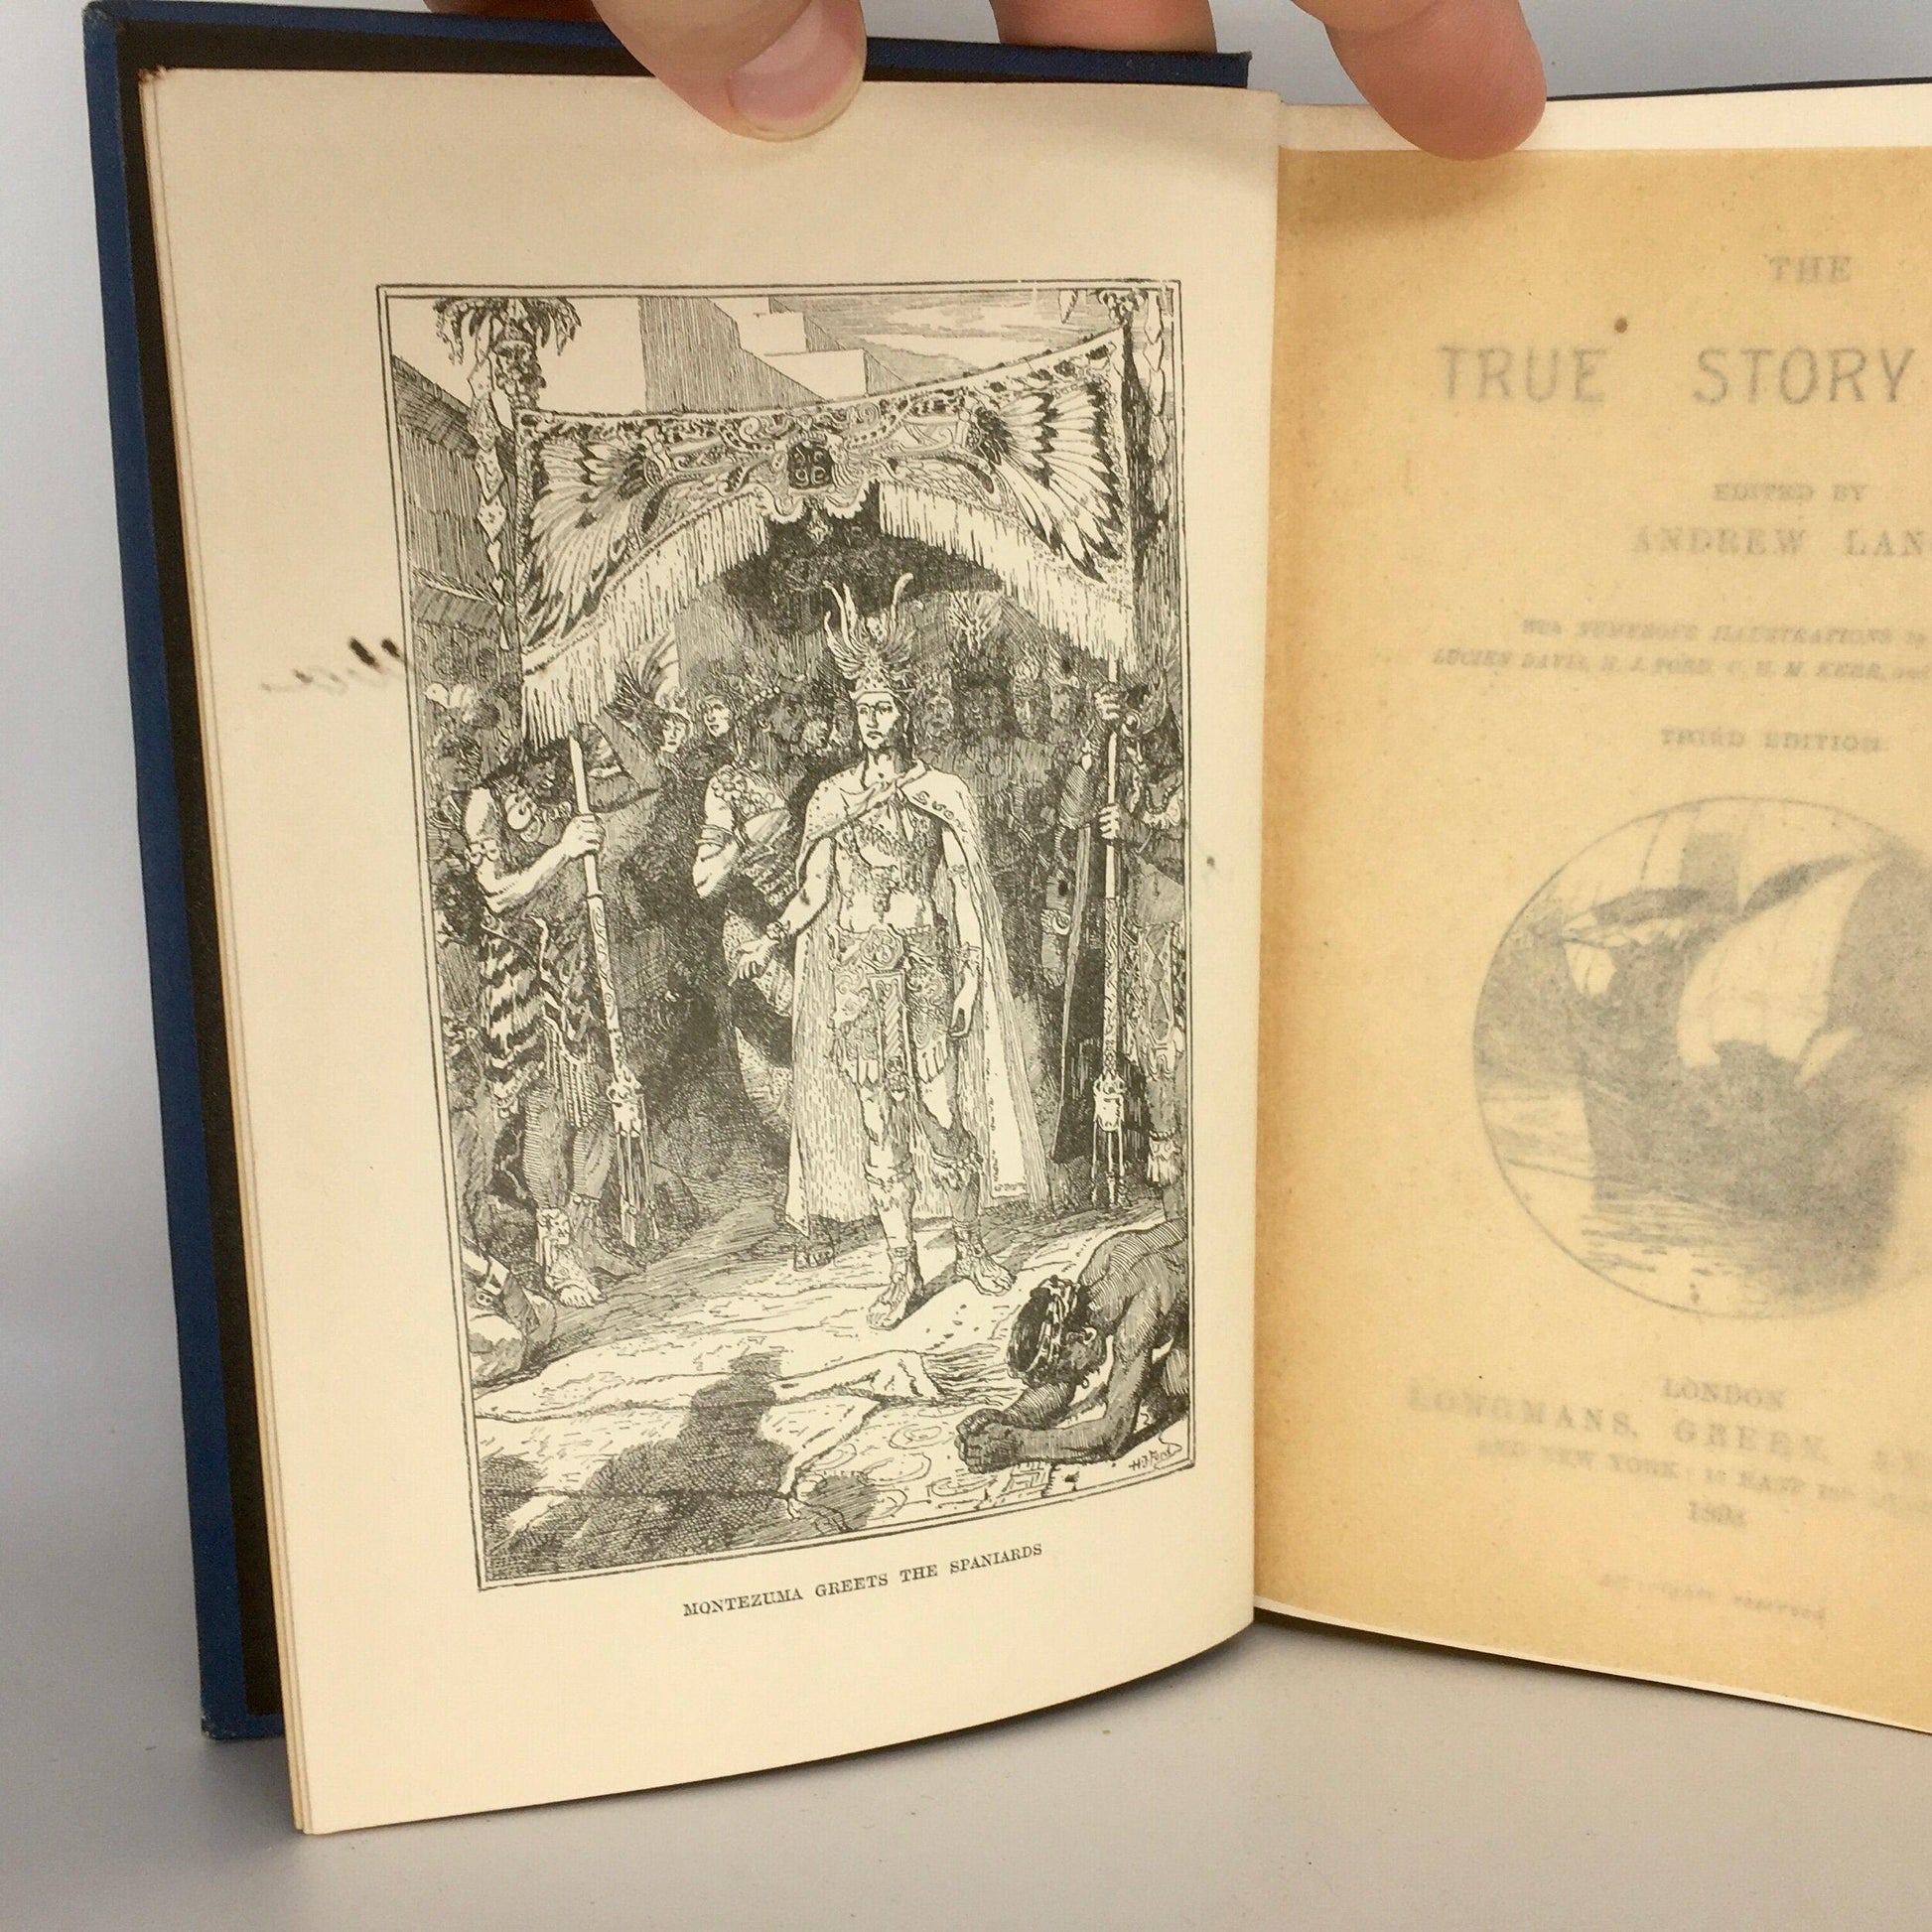 LANG, Andrew “The True Story Book” [Longmans, Green & Co, 1894] 3rd Edition - Buzz Bookstore